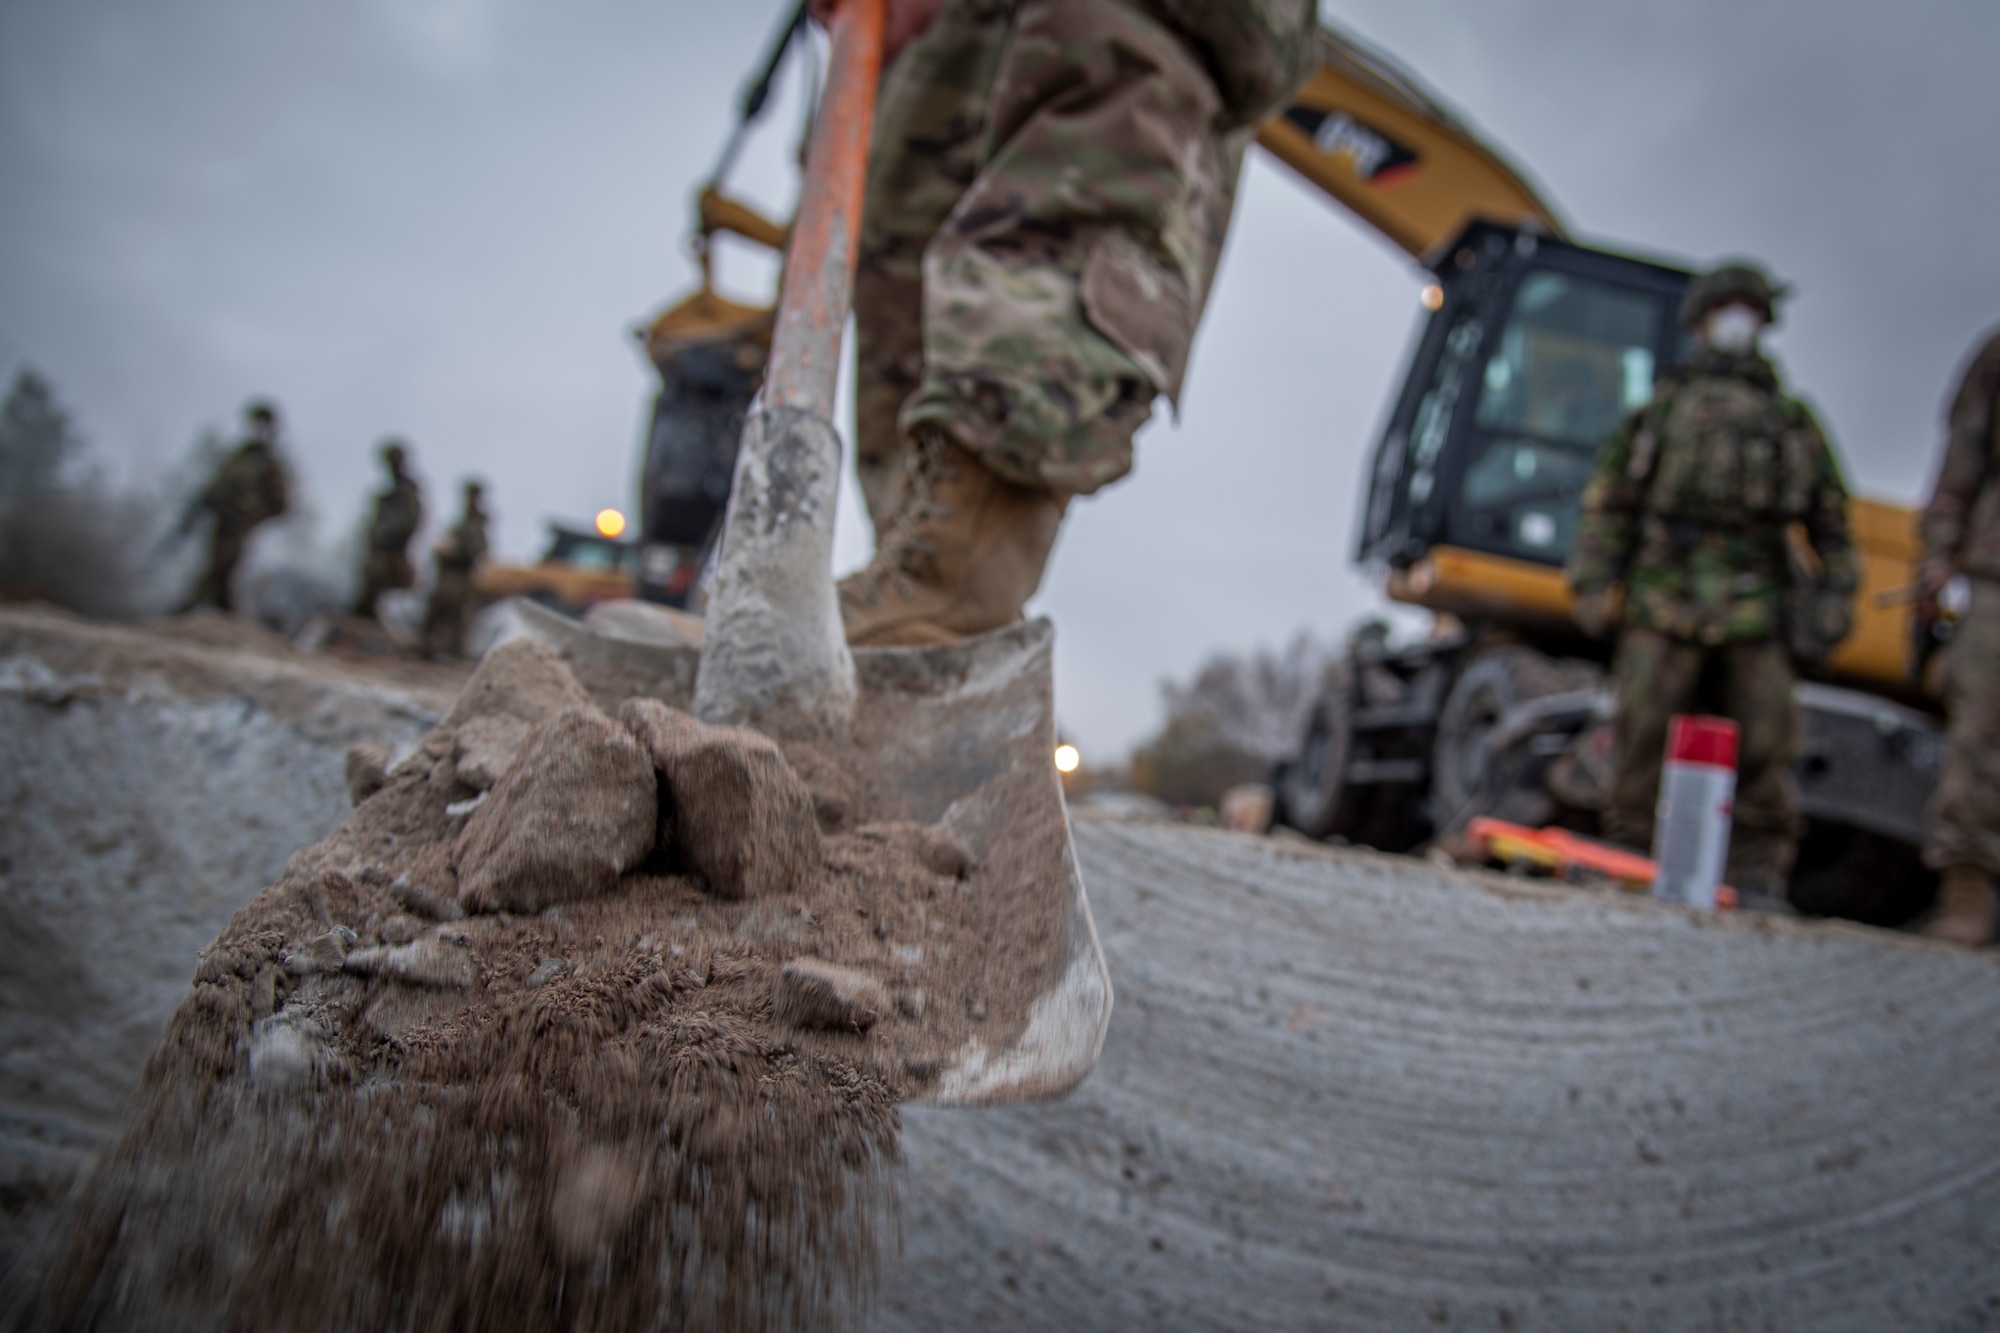 A U.S. Air Force Airman with the 435th Construction and Training Squadron clears debris during rapid airfield damage recovery training at Ramstein Air Base, Germany during a Silver Flag training course, Nov. 18, 2021.